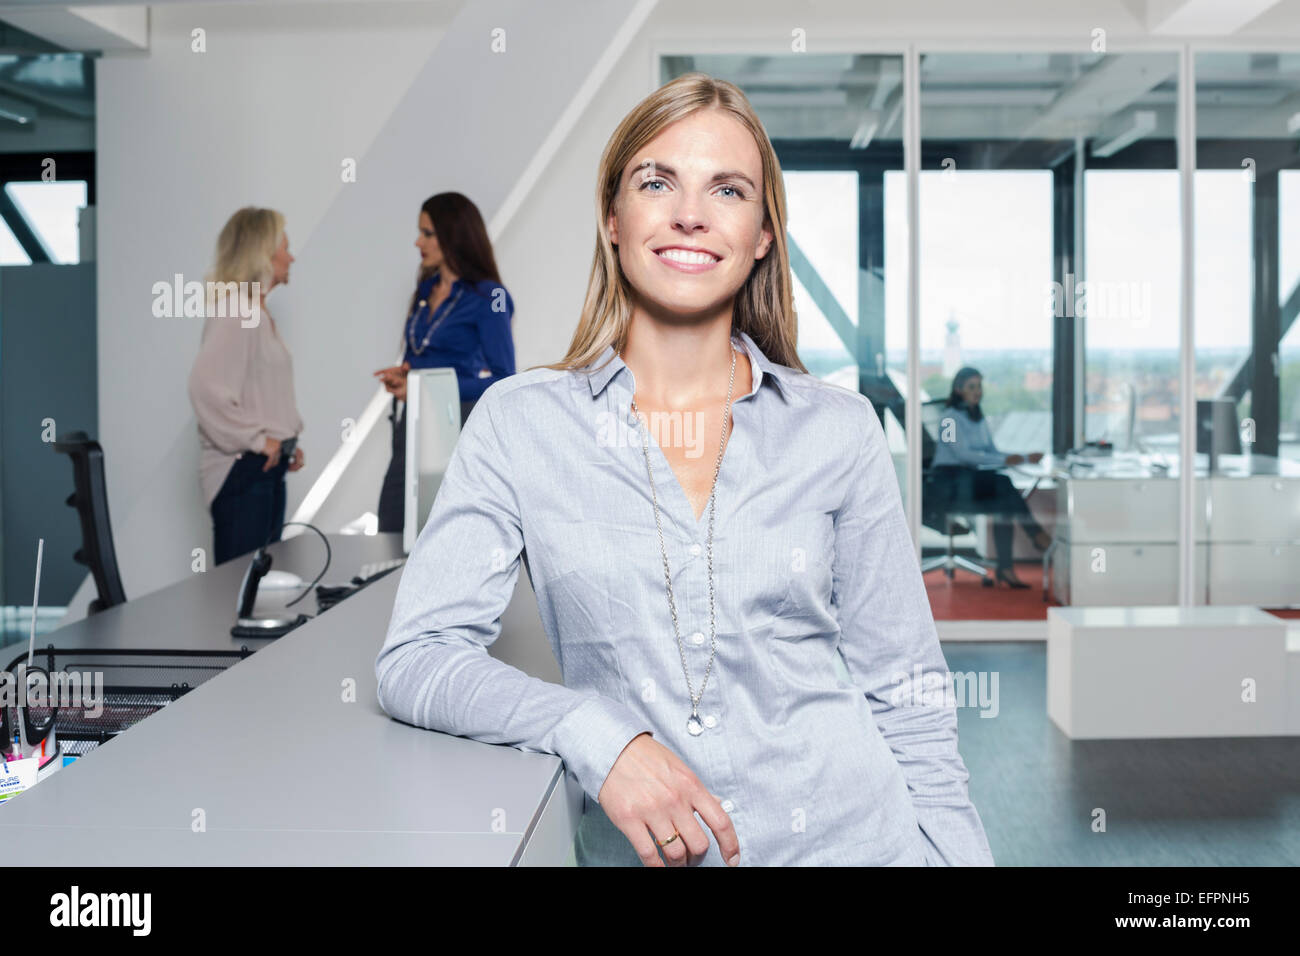 Mature woman wearing grey shirt in office, portrait Stock Photo